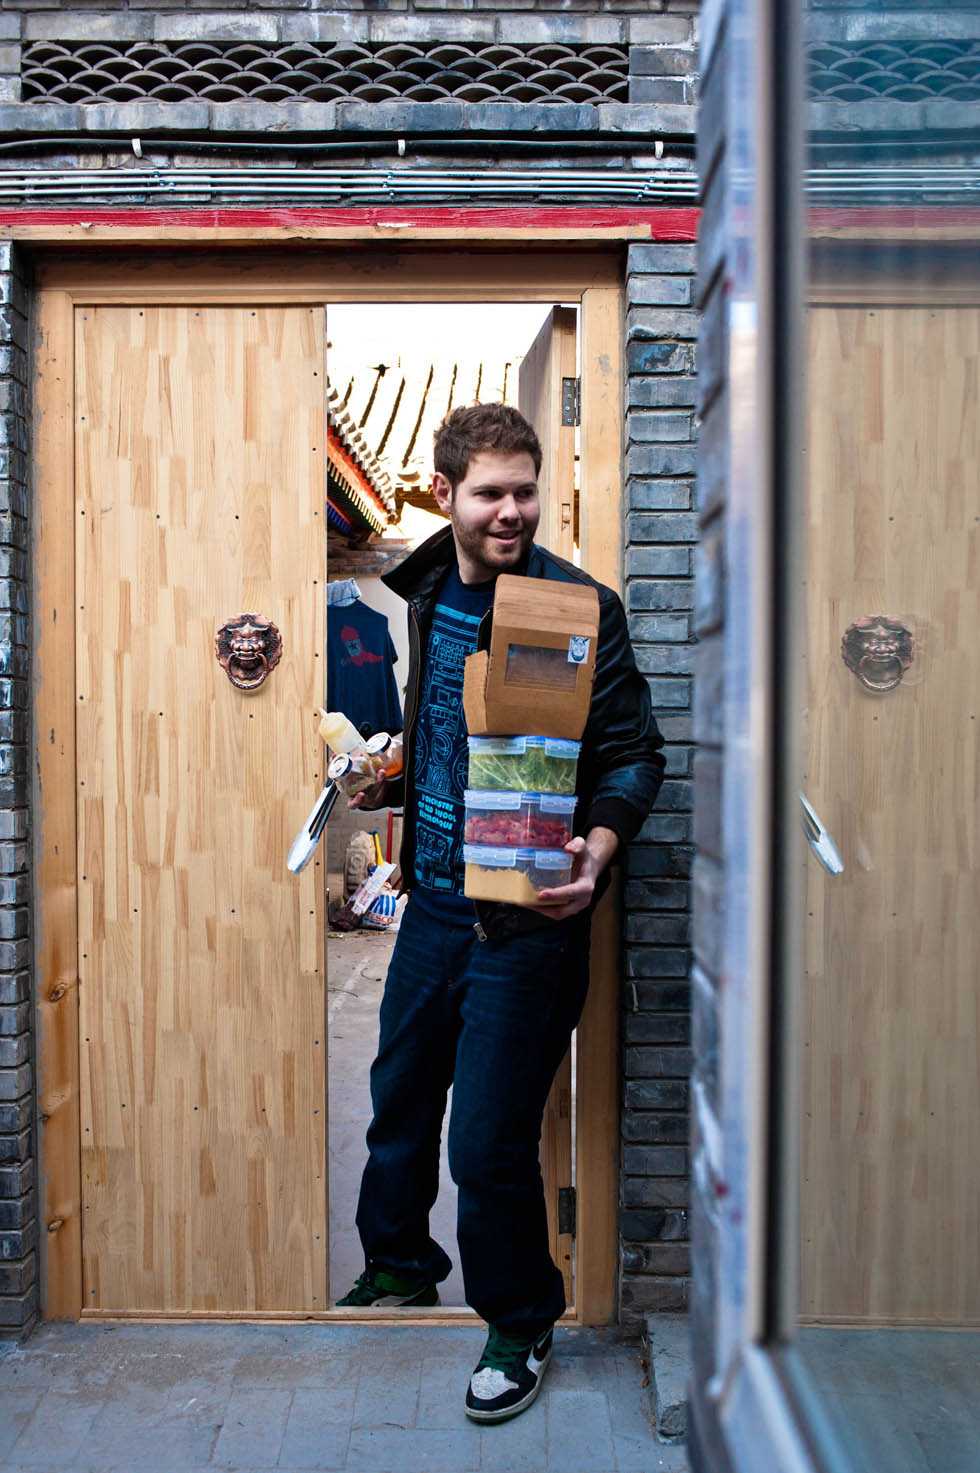 Carrying snack ingredients, Jamie sets off for business from his residence near Shichahai, a historic scenic area in Beijing, capital of China, Dec. 16, 2011. (Xinhua/Liu Jinhai)